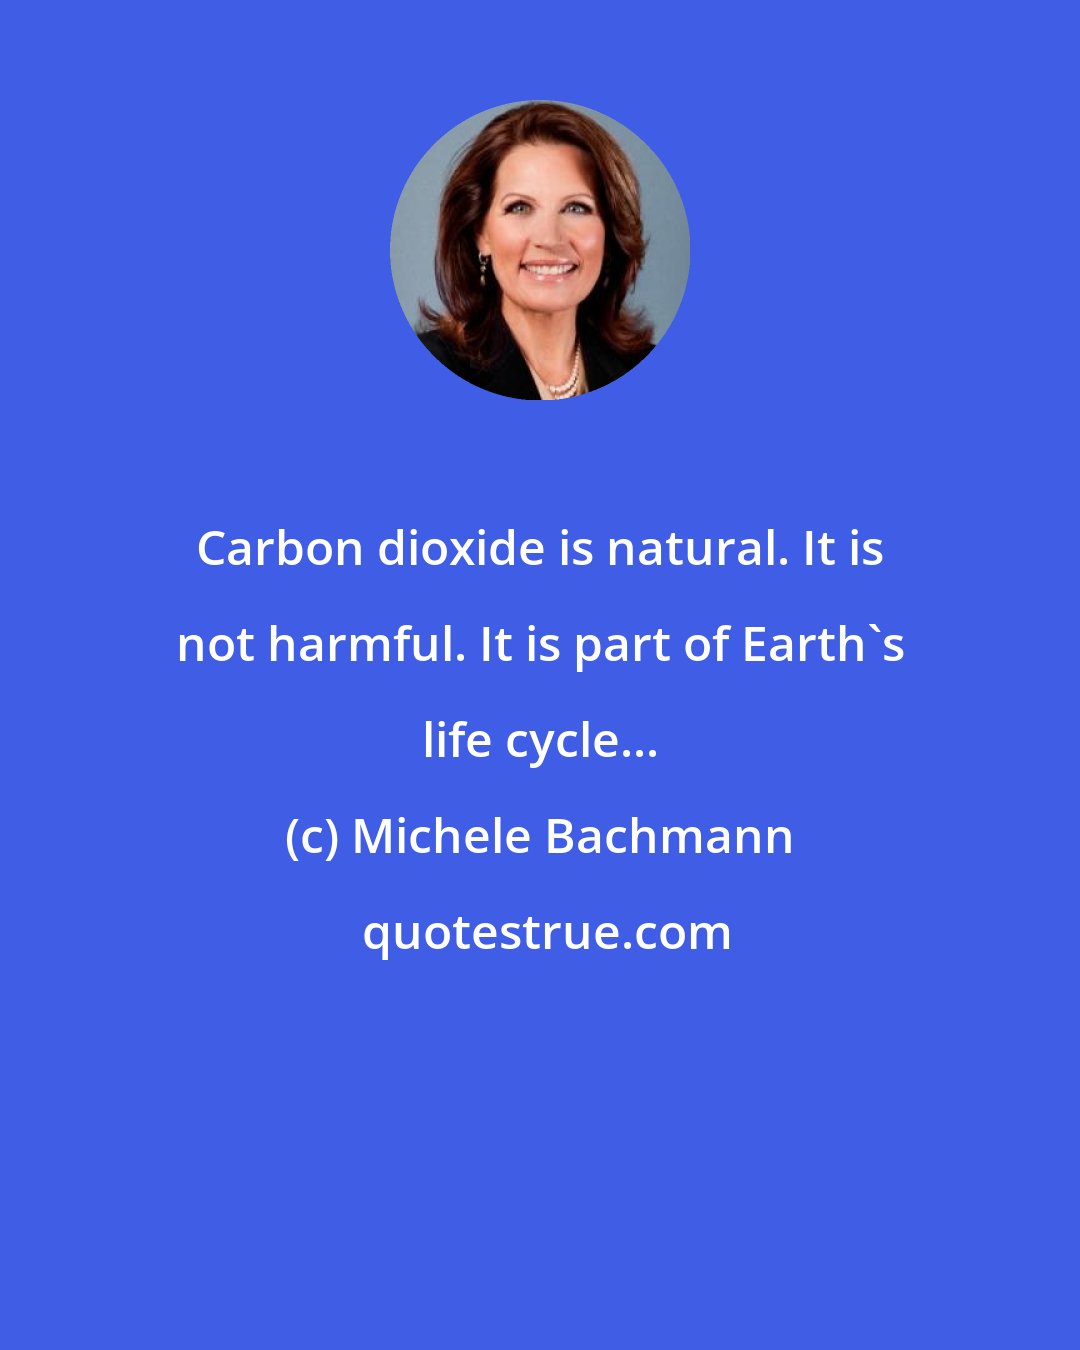 Michele Bachmann: Carbon dioxide is natural. It is not harmful. It is part of Earth's life cycle...